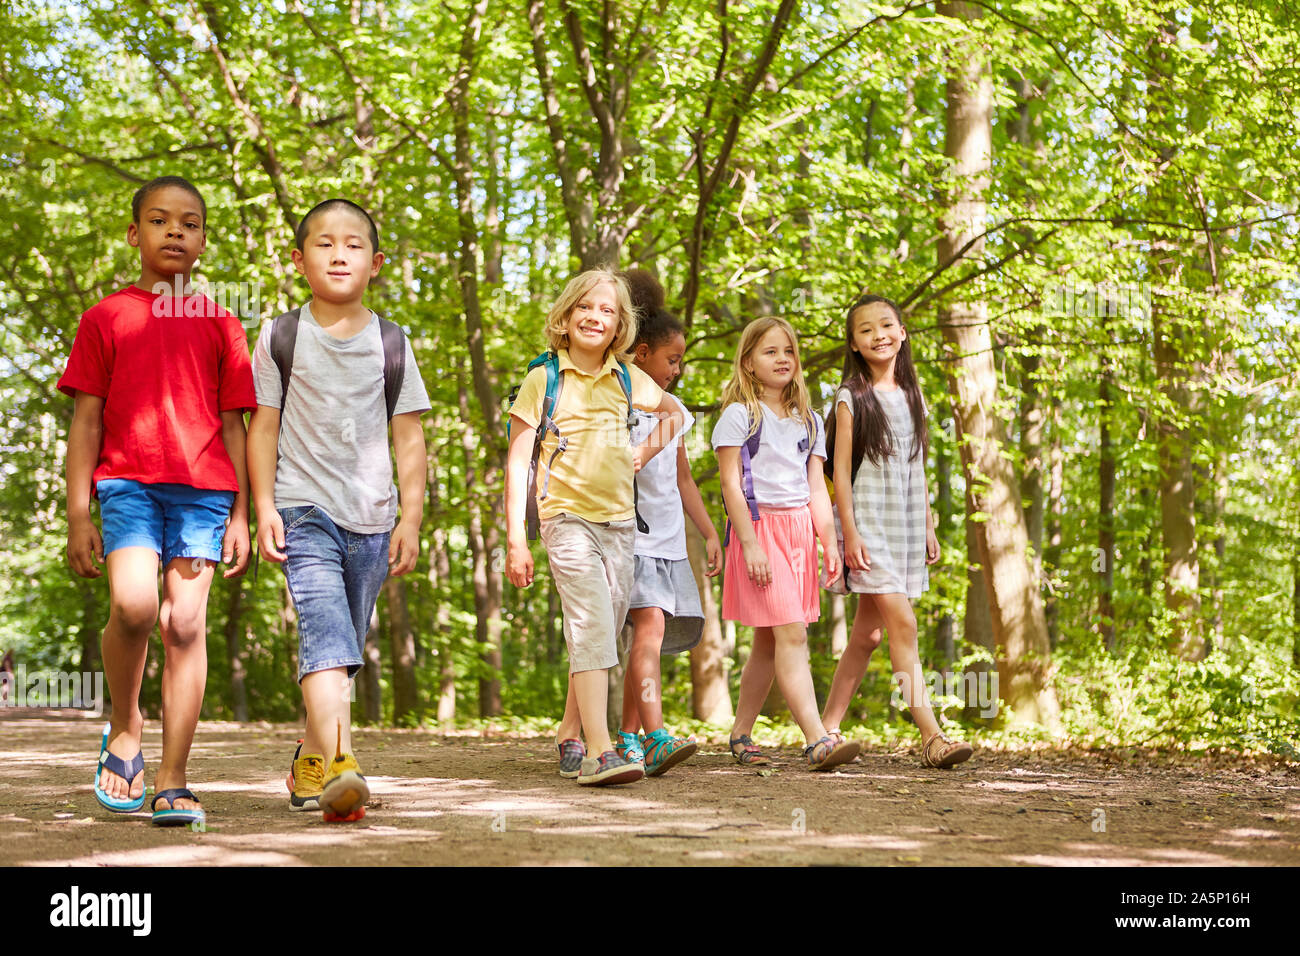 Group of multicultural kids is making outing or hiking day in nature Stock Photo